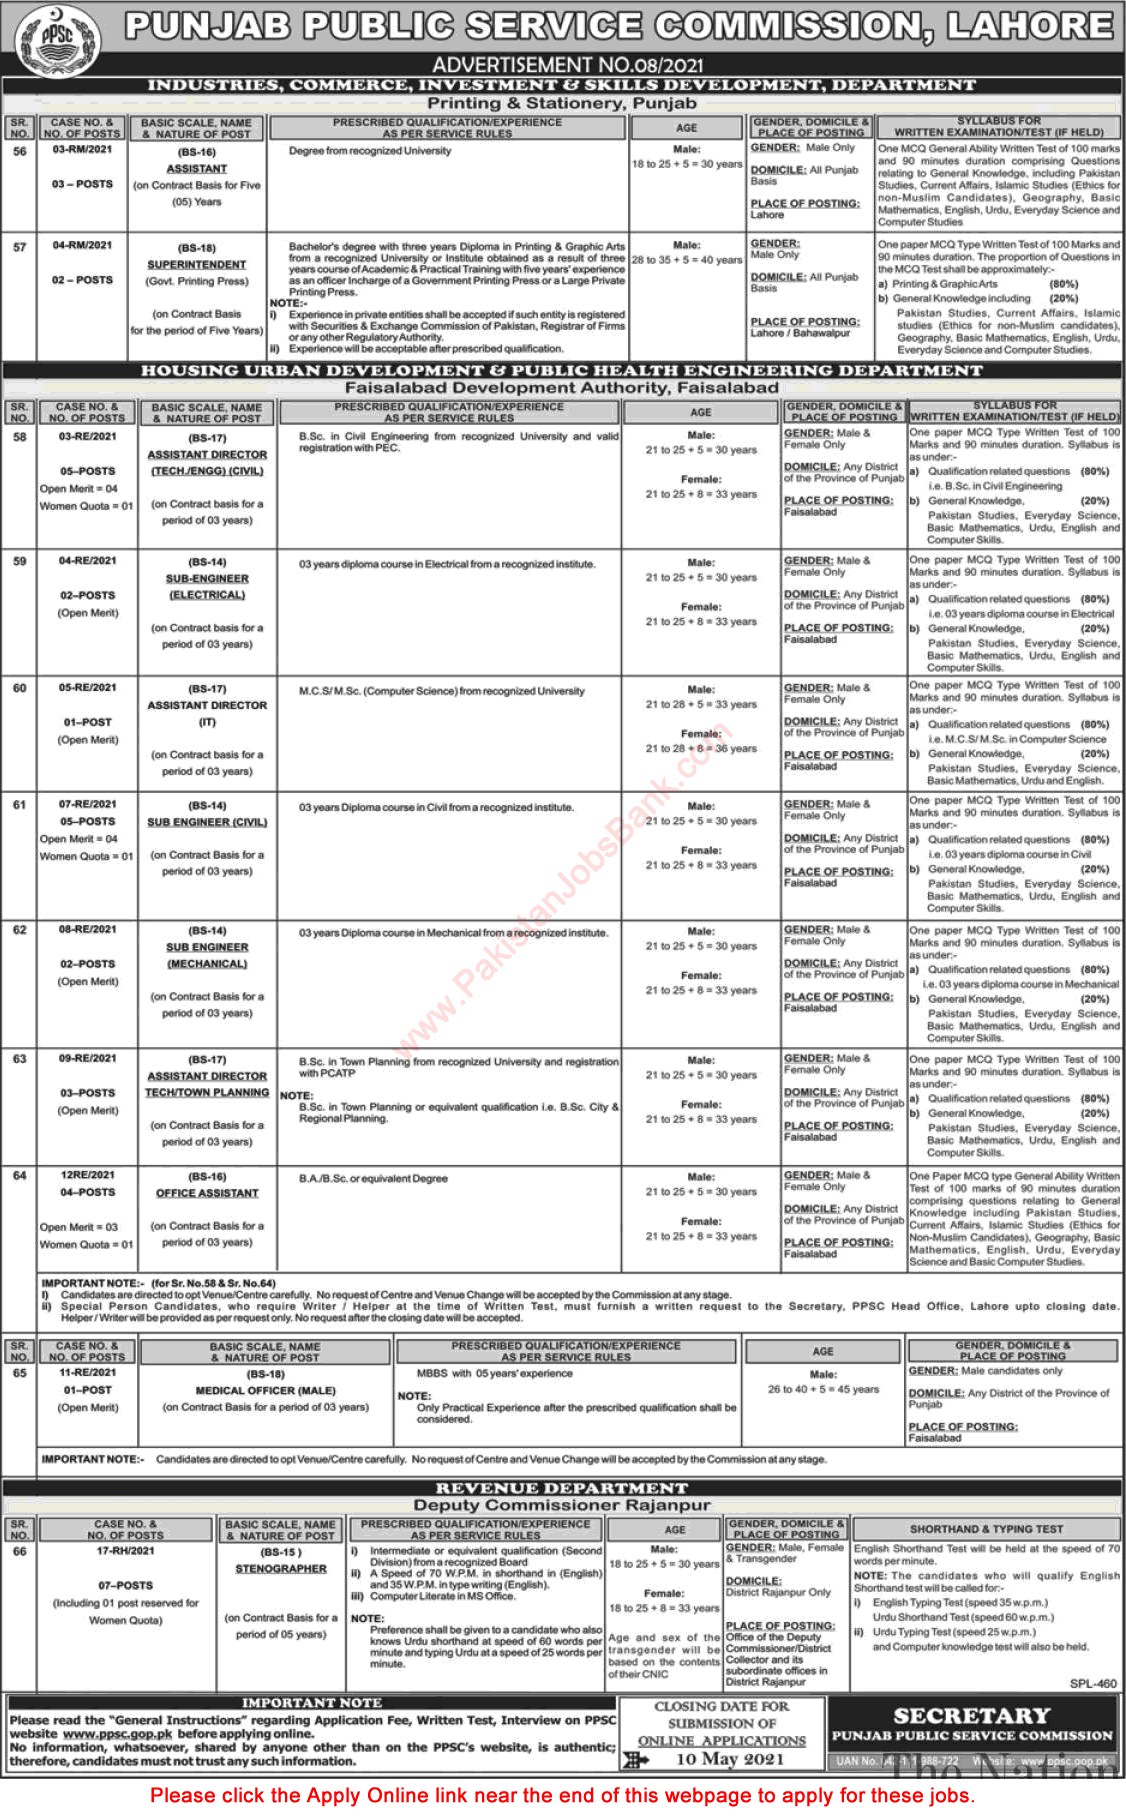 PPSC Jobs April 2021 Online Apply Consolidated Advertisement No 08/2021 8/2021 Latest